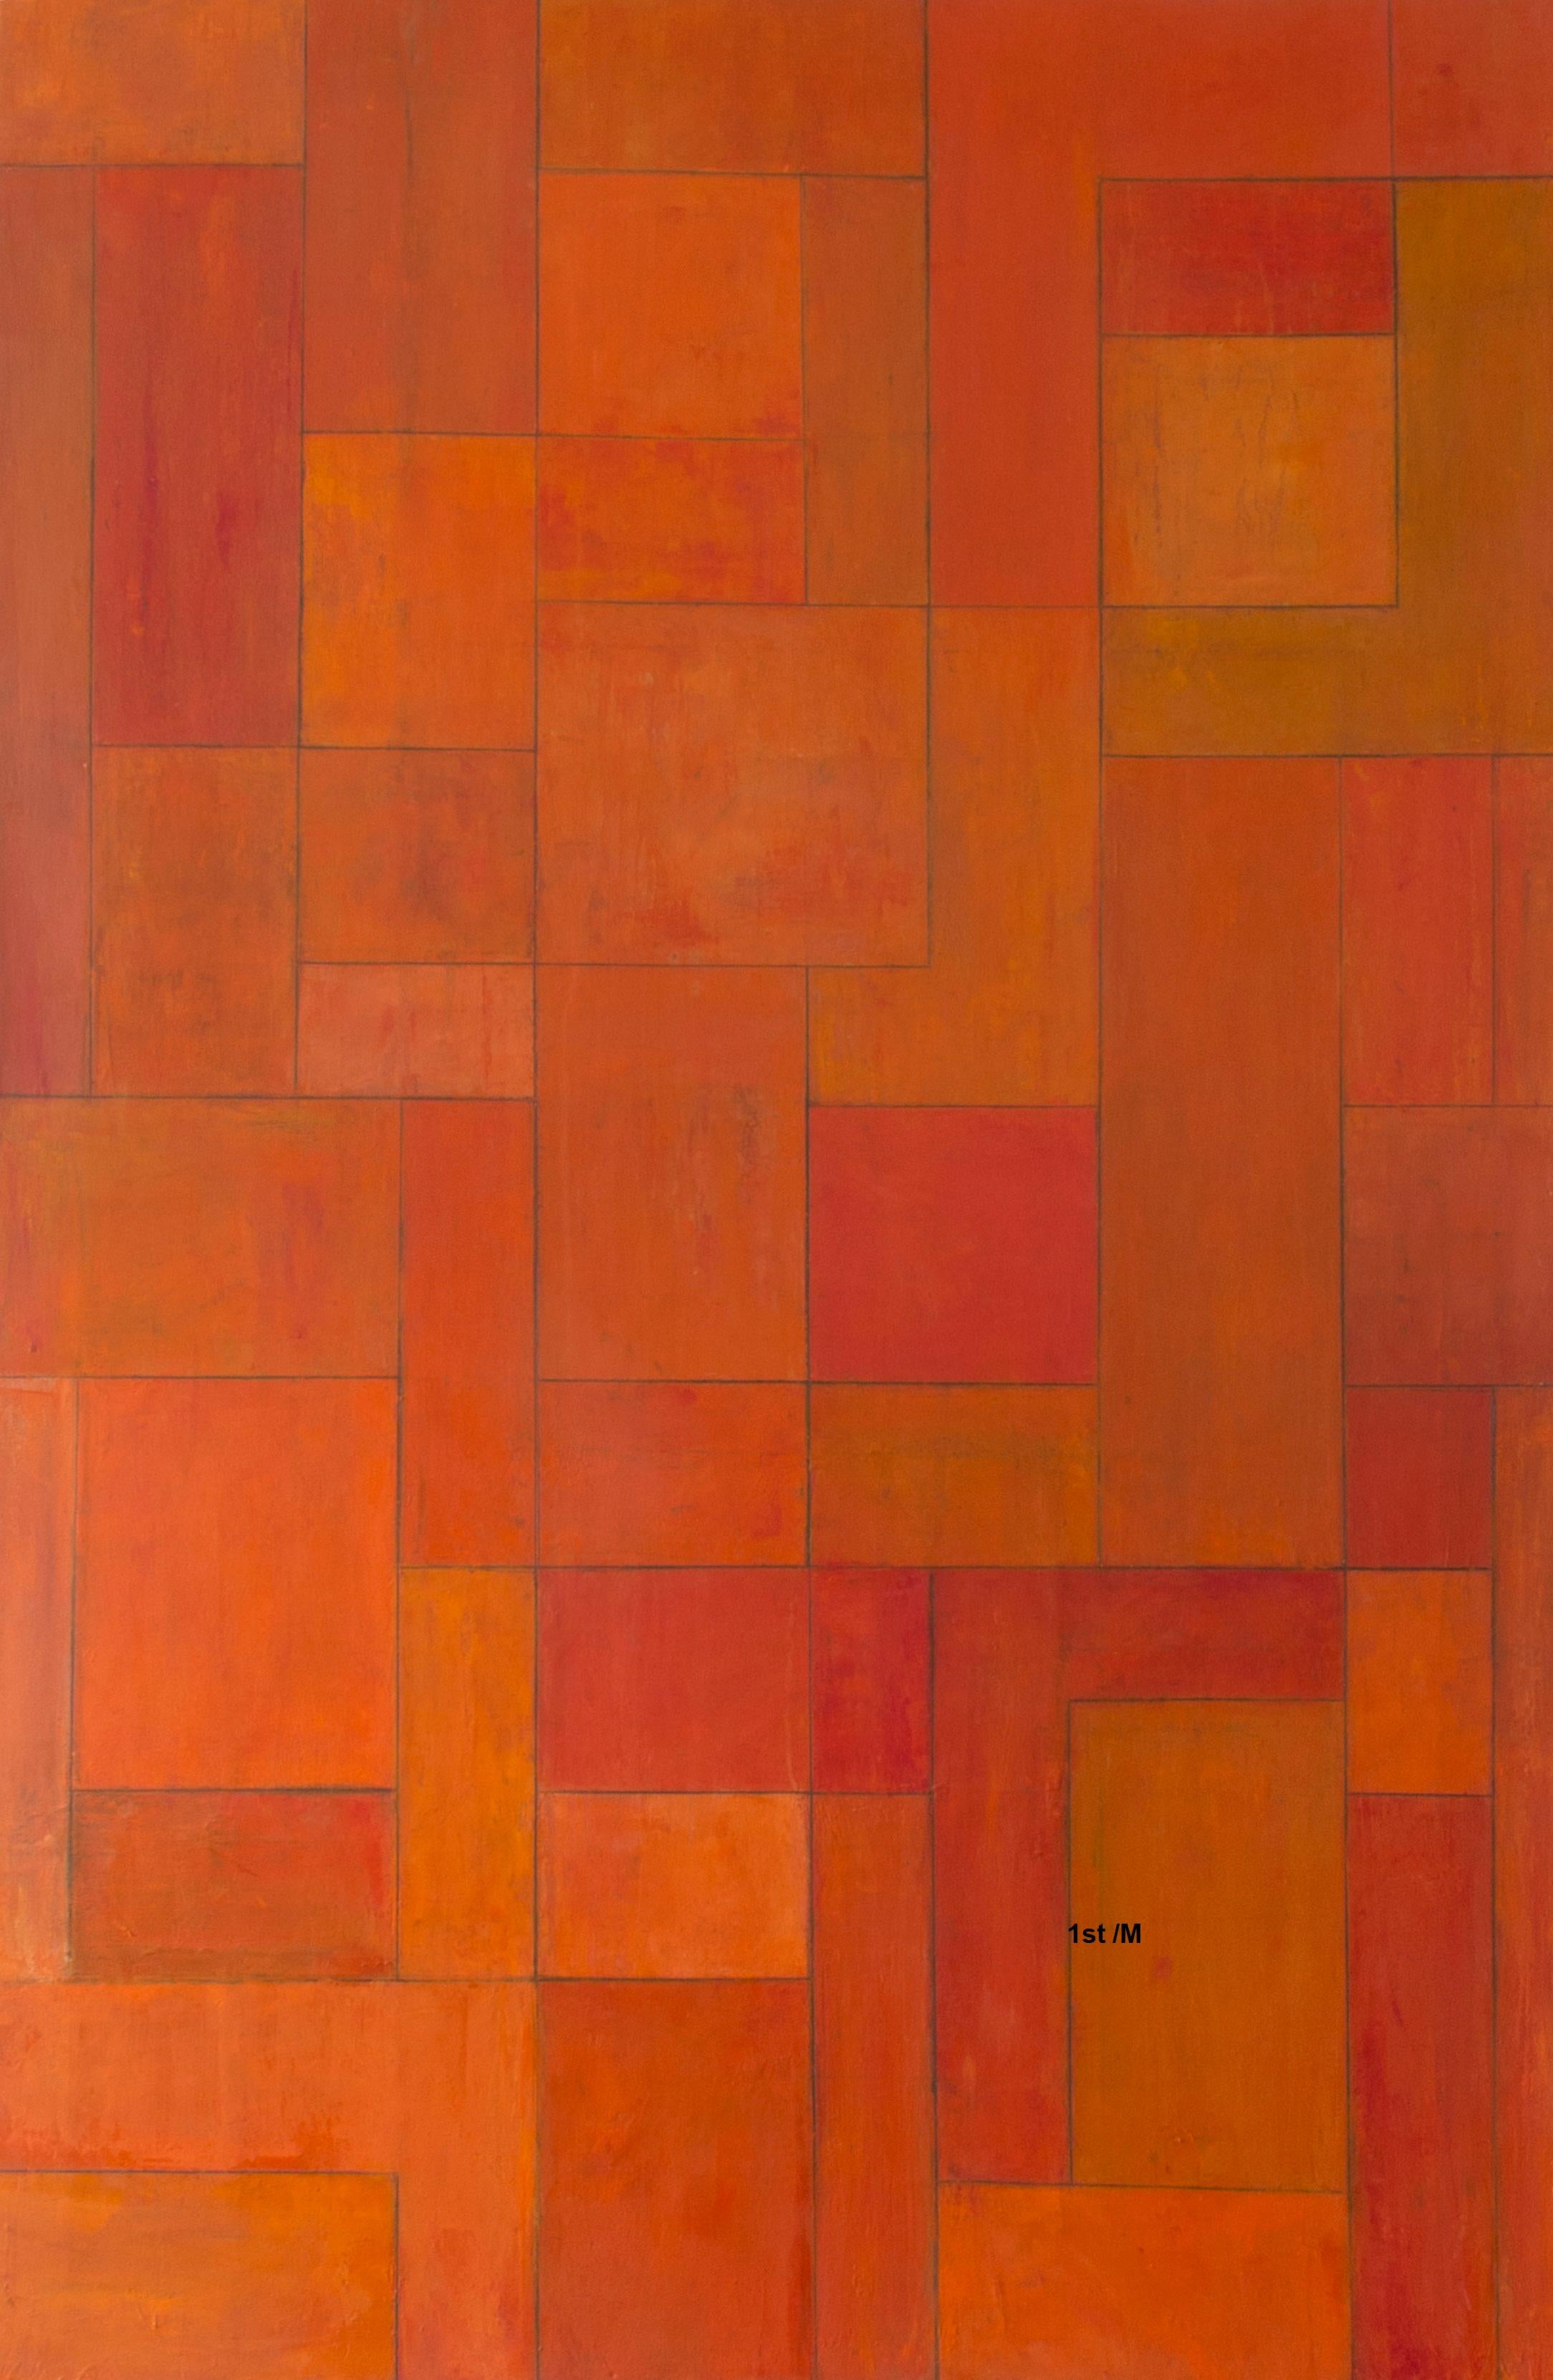 Stephen Cimini Abstract Painting - Oil painting 6.5 x 4 ft - Orange Gold - architectural, color